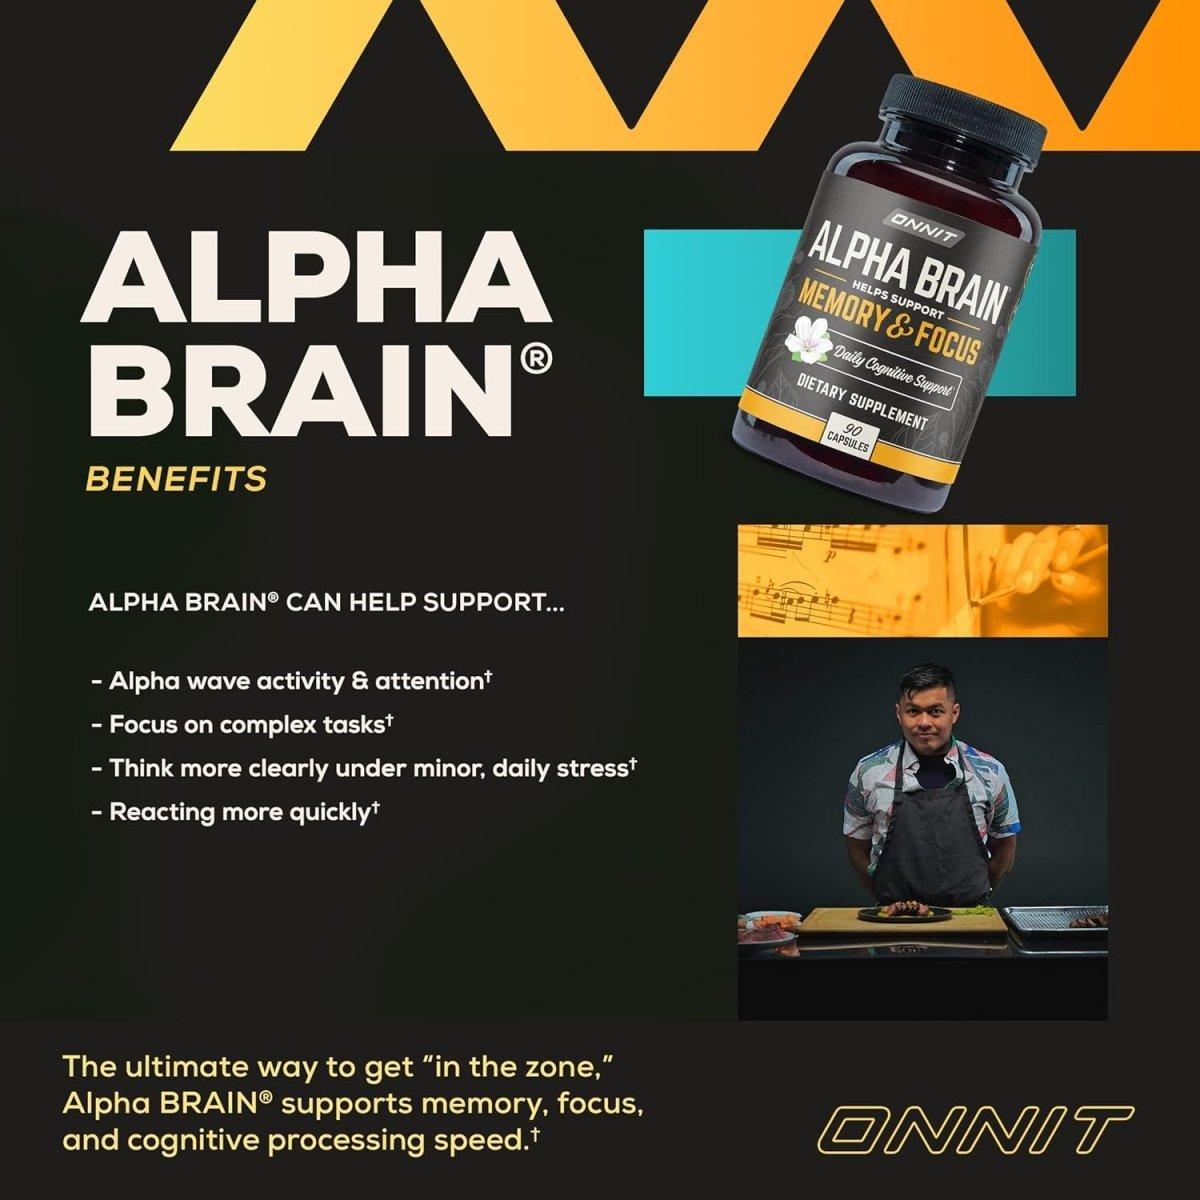 Onnit Alpha Brain Premium Nootropic Supplement, 90 Count, for Men & Women - Caffeine-Free Focus Capsules for Concentration, Brain & Memory Support - Brain Booster Cat'S Claw, Bacopa, Oat Straw - Glam Global UK